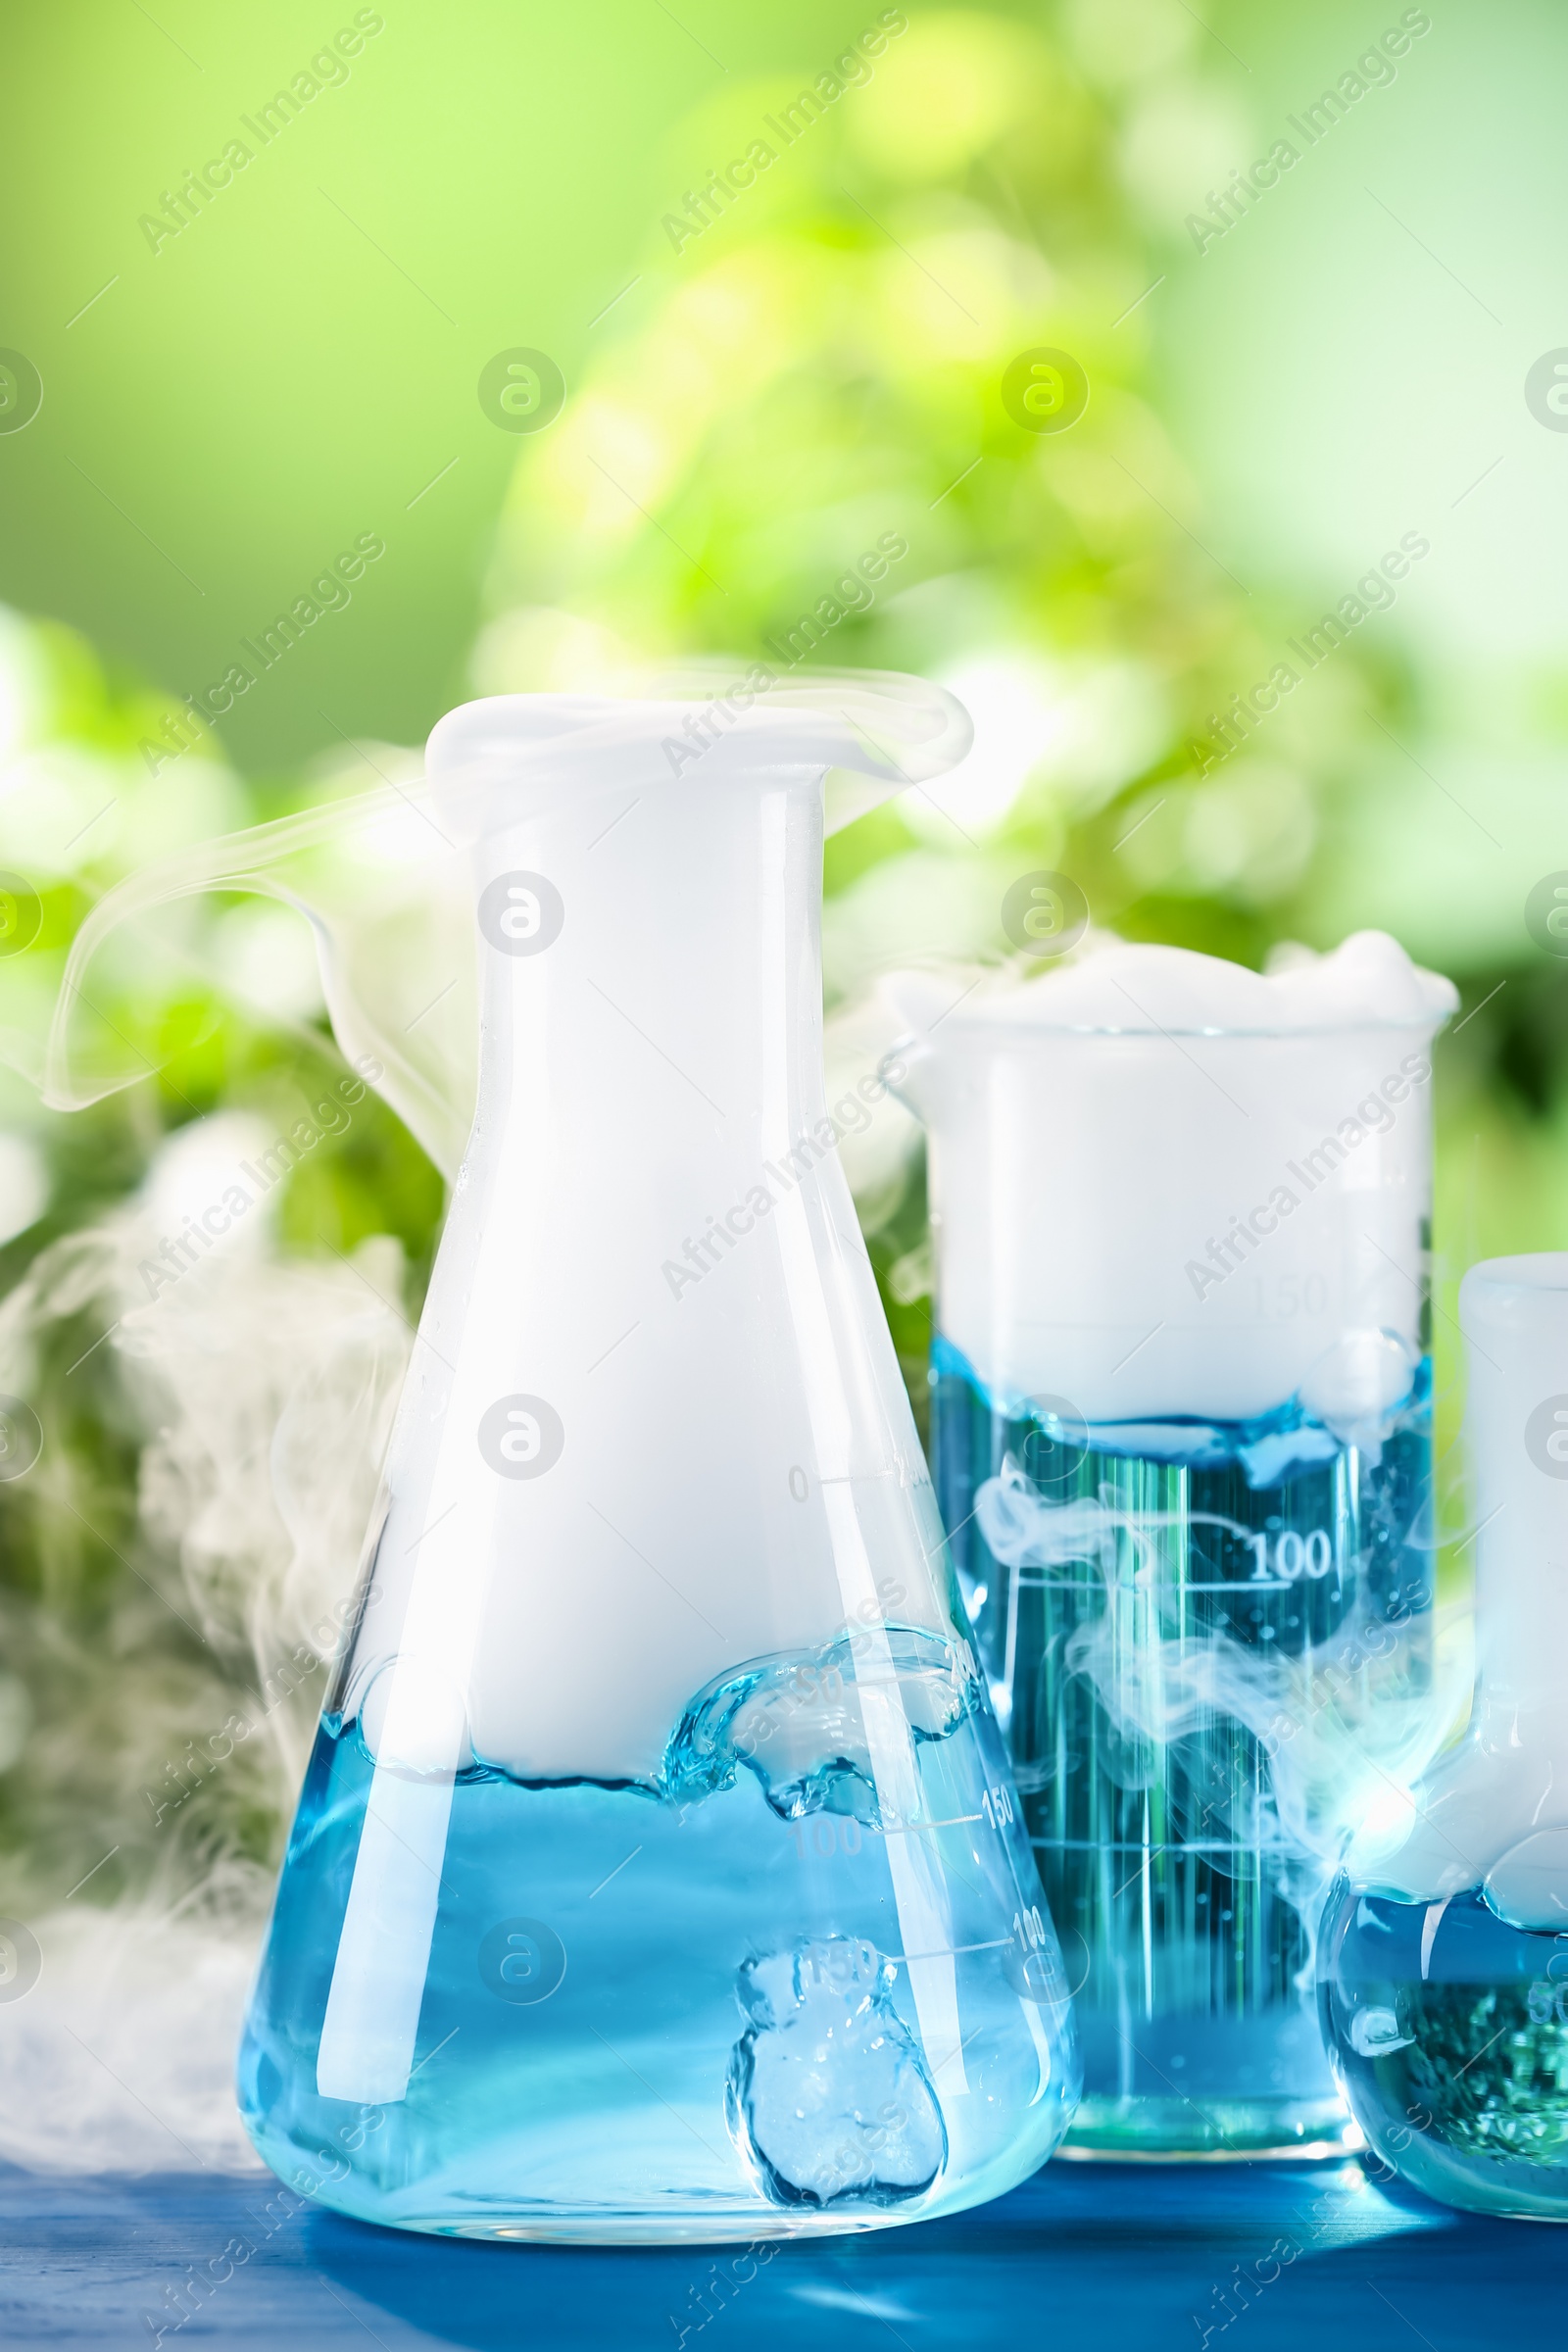 Photo of Laboratory glassware with colorful liquids on blue wooden table outdoors. Chemical reaction